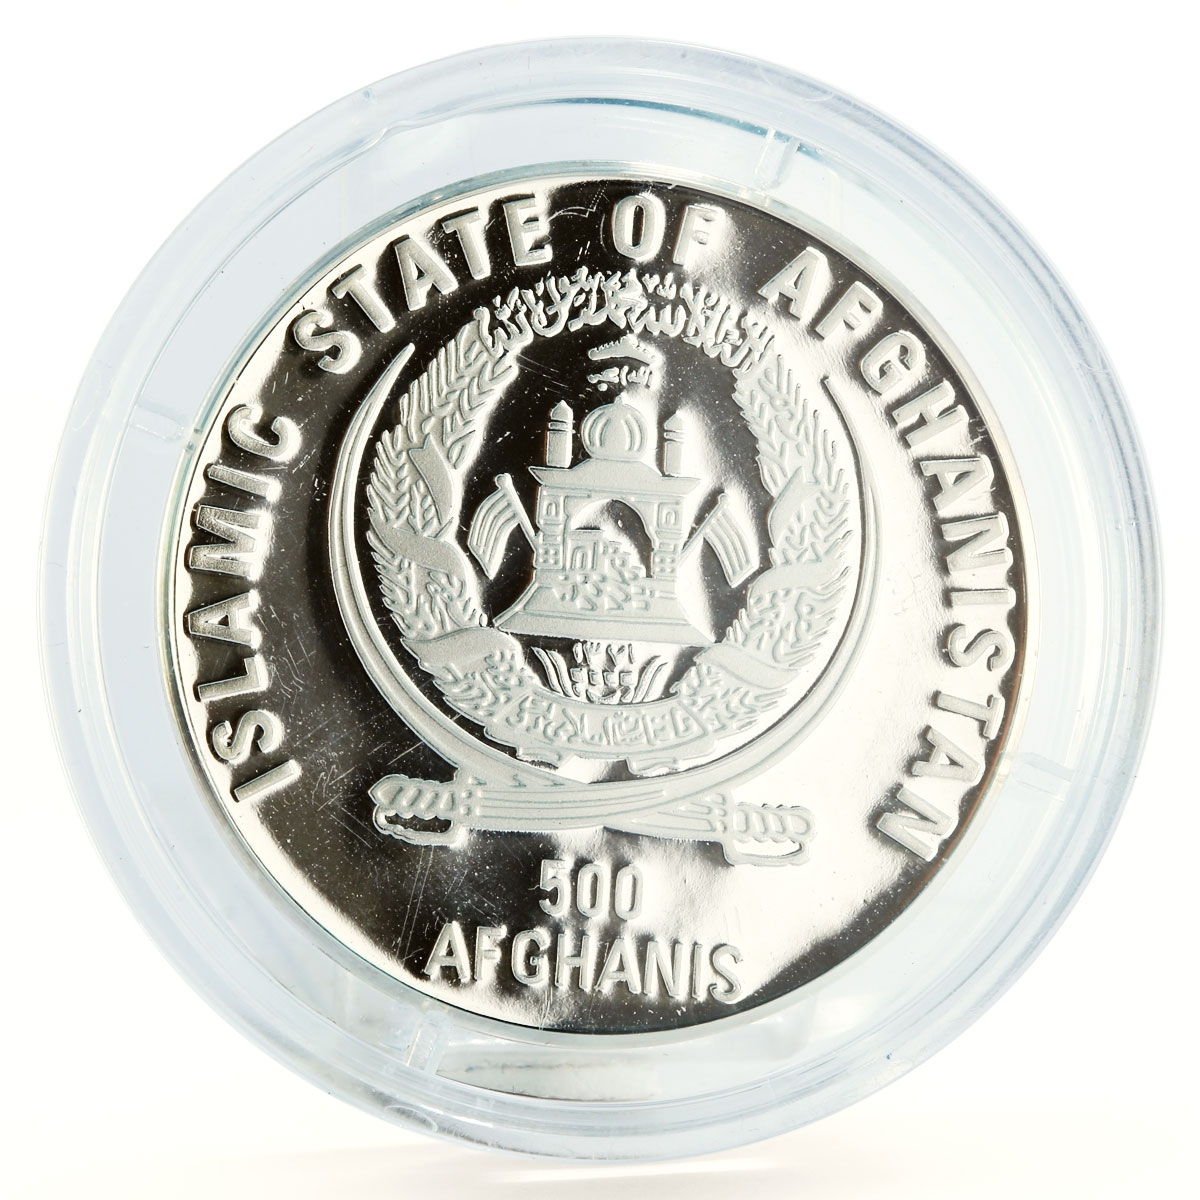 Afghanistan 500 afghanis The Beginning of the New Millennium silver coin 2000